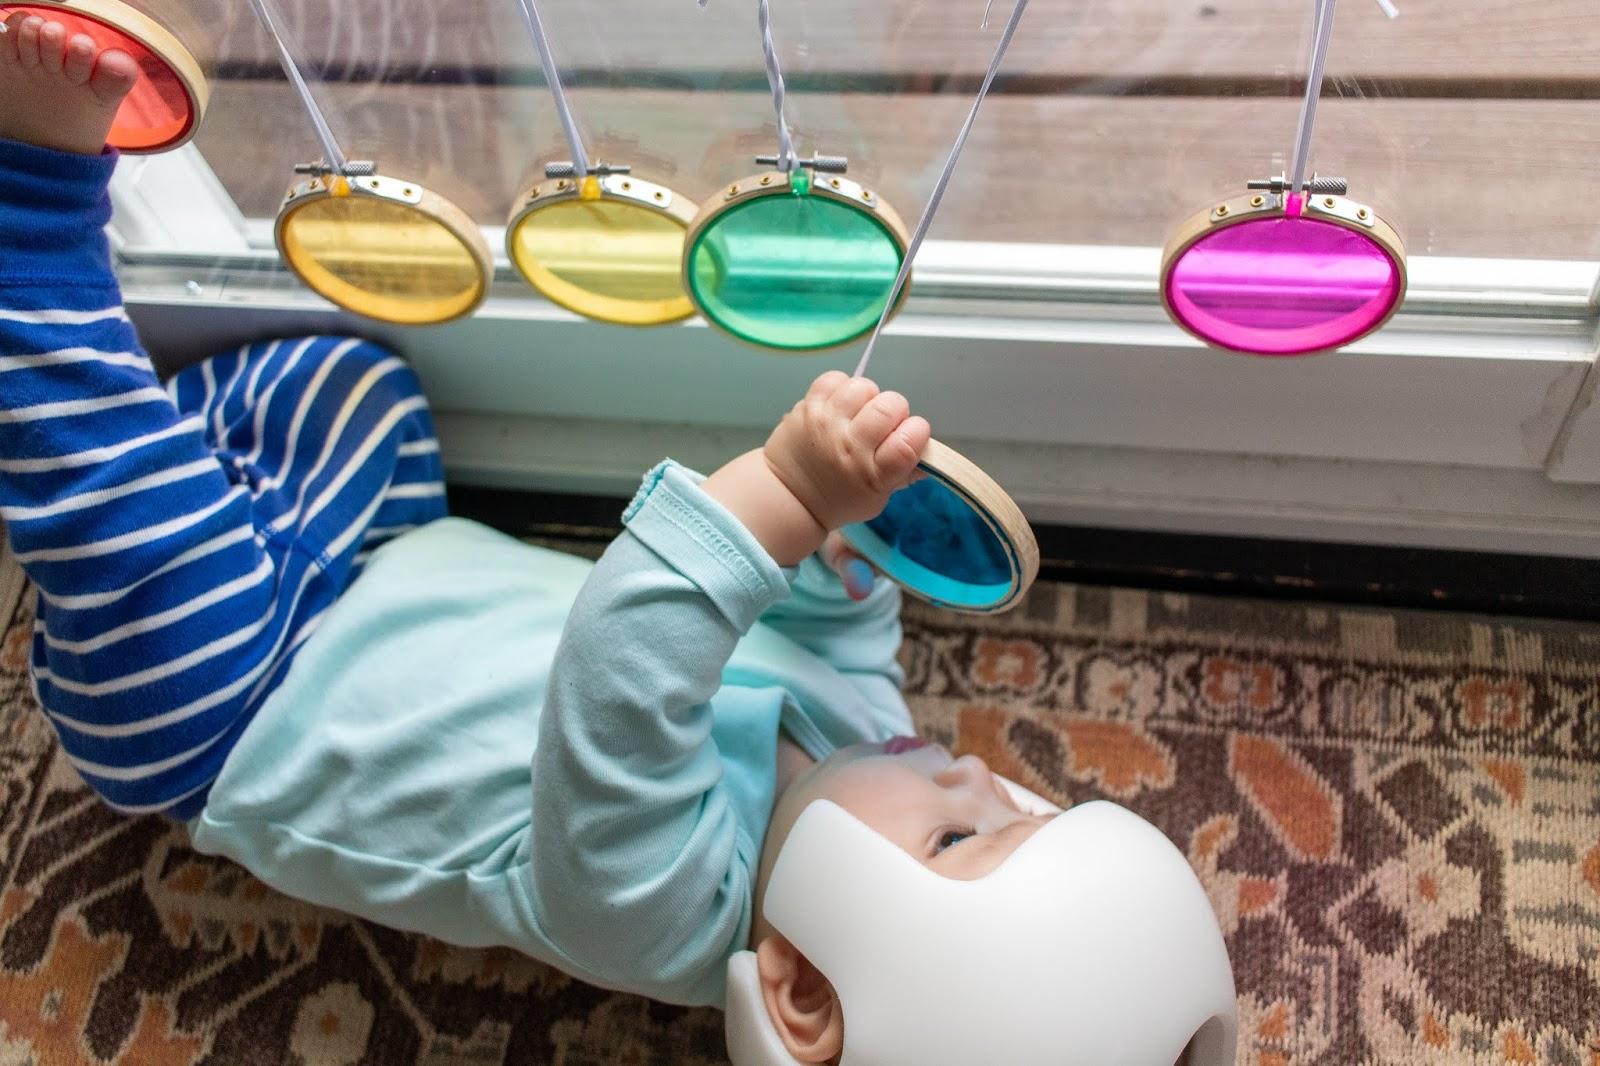 Baby development happens best through sensory rich play and exploration. Here's an easy, baby activity to help your baby explore color.